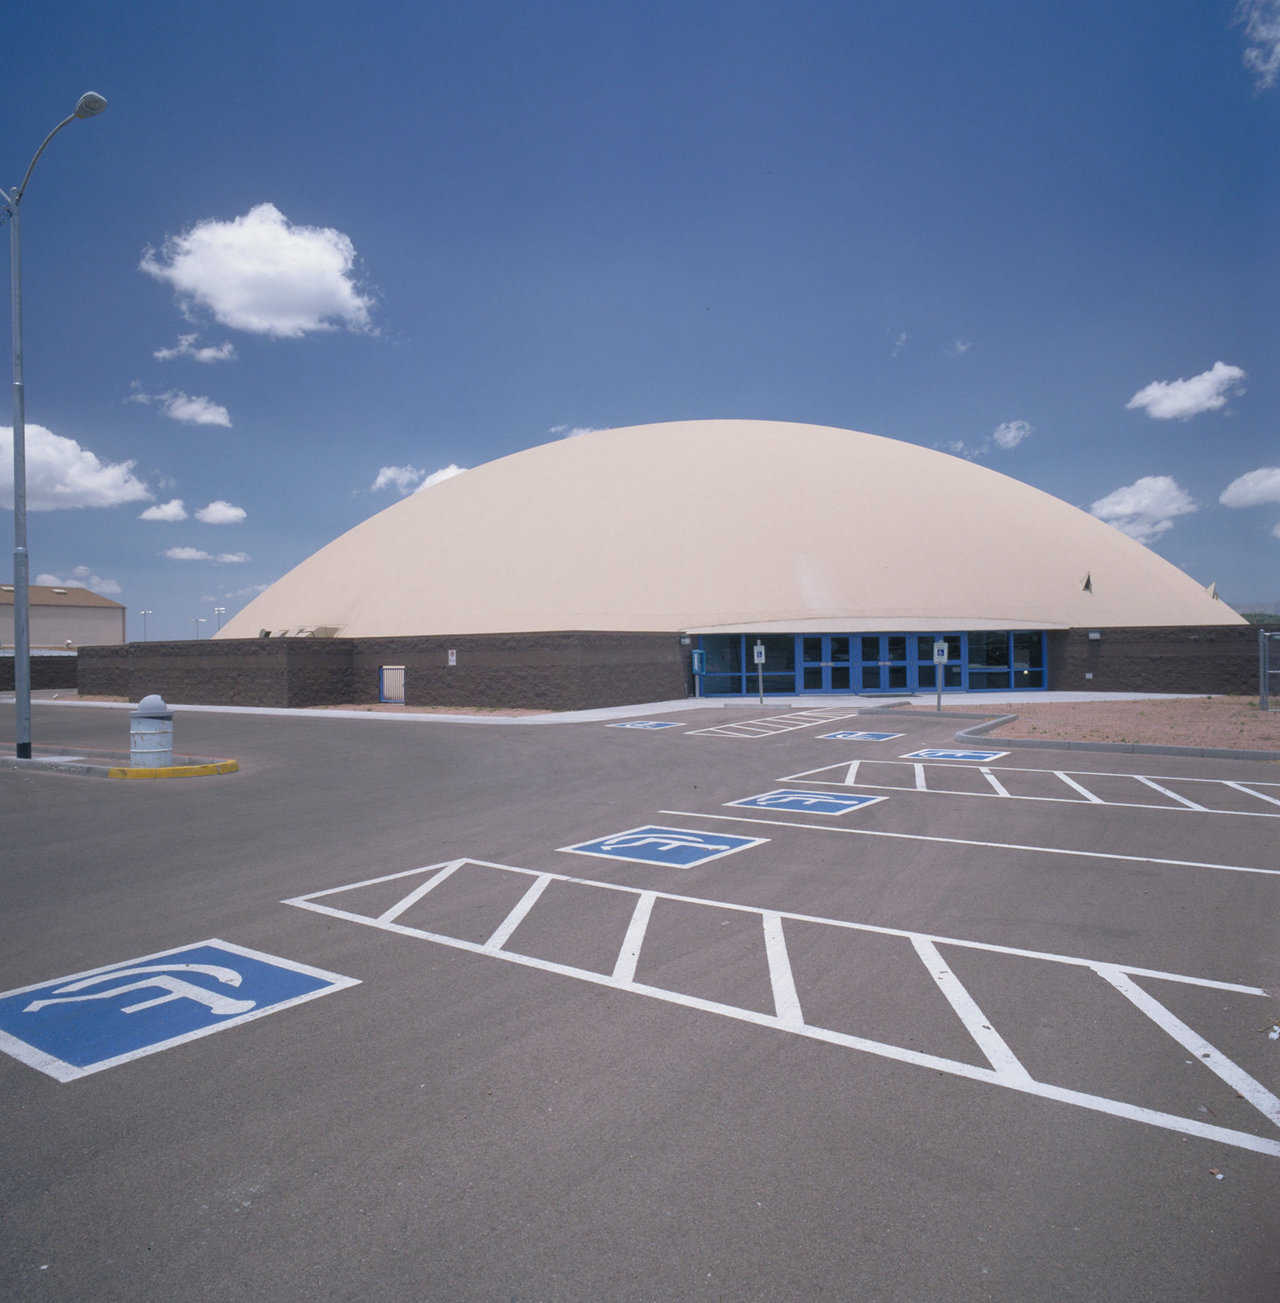 Affordability — Built in 1996, the new sports complex cost about $2.8 million, as opposed to about $5 million for a comparable conventional building.